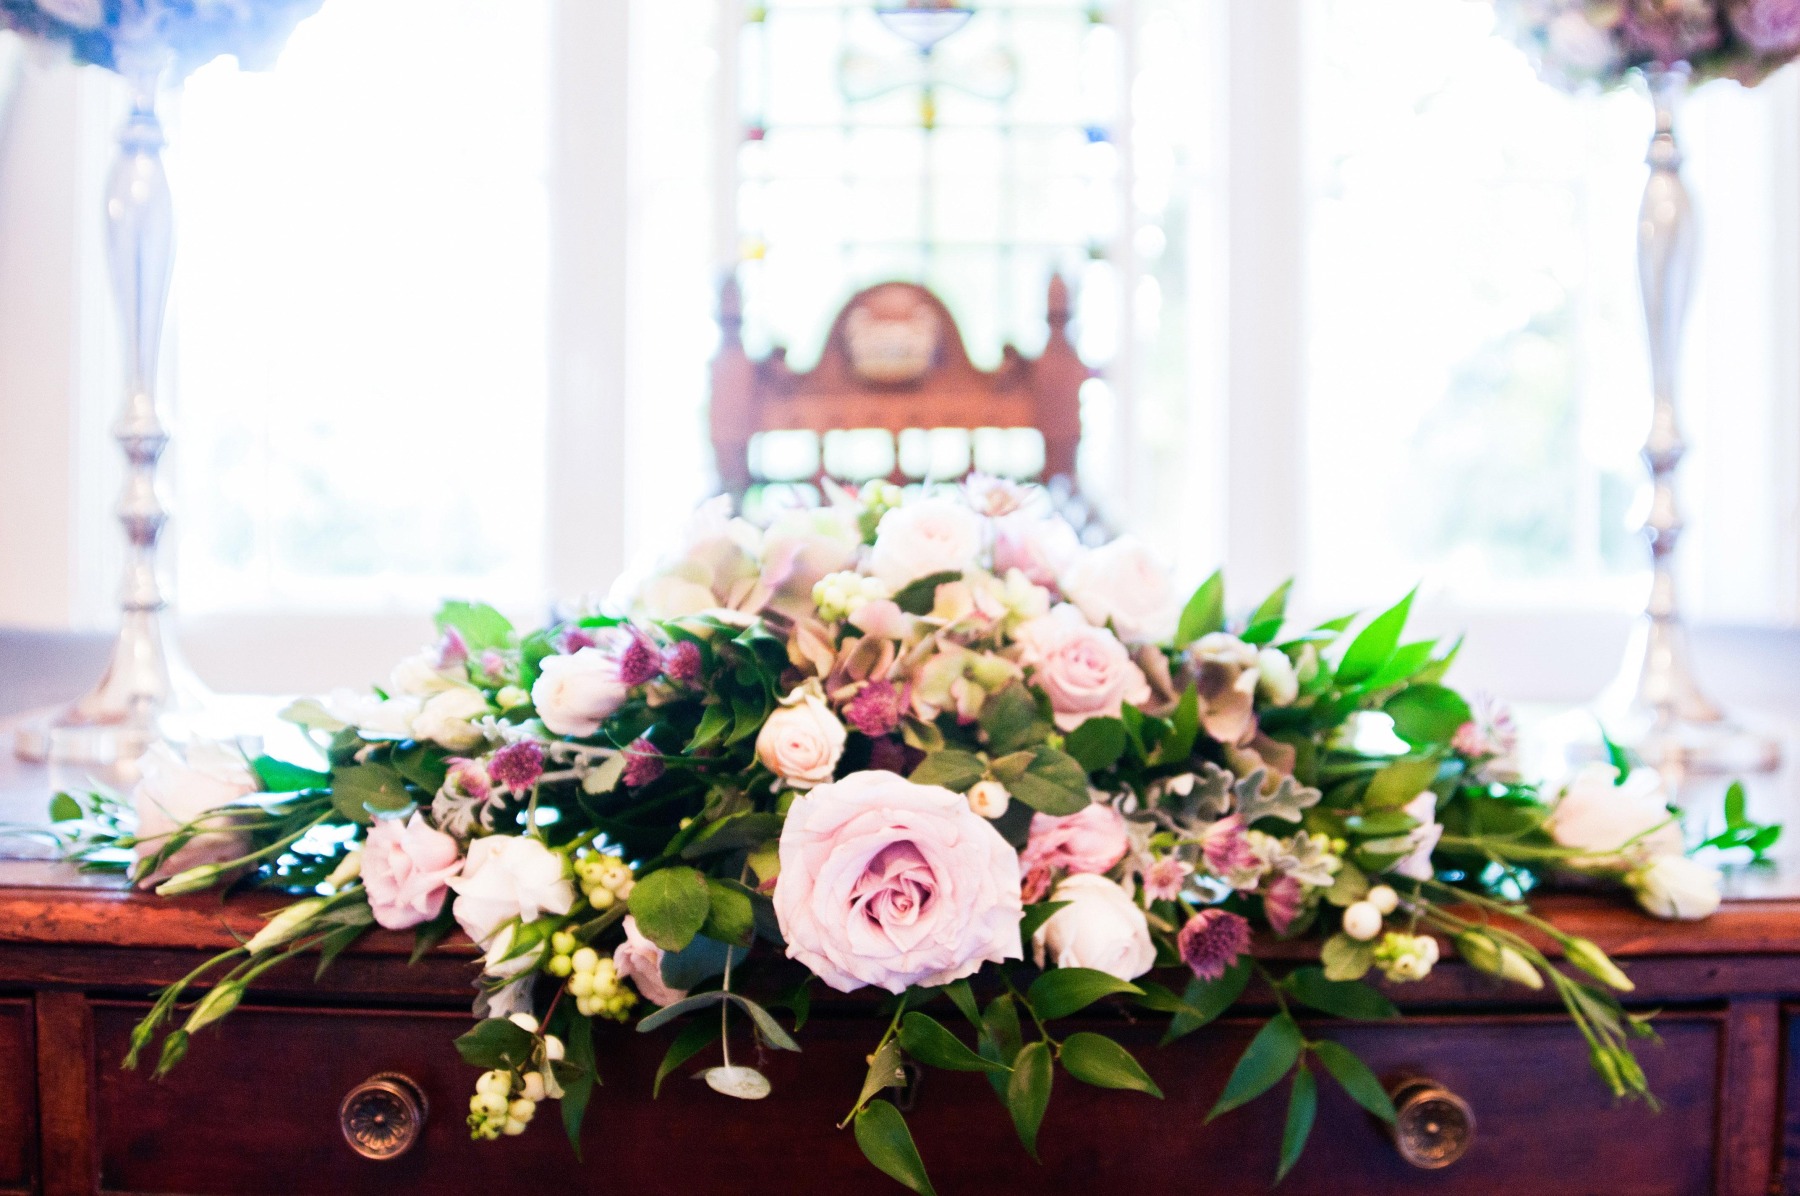 A close up of a floral display of pink flowers in front of the winged chair and stained glass window